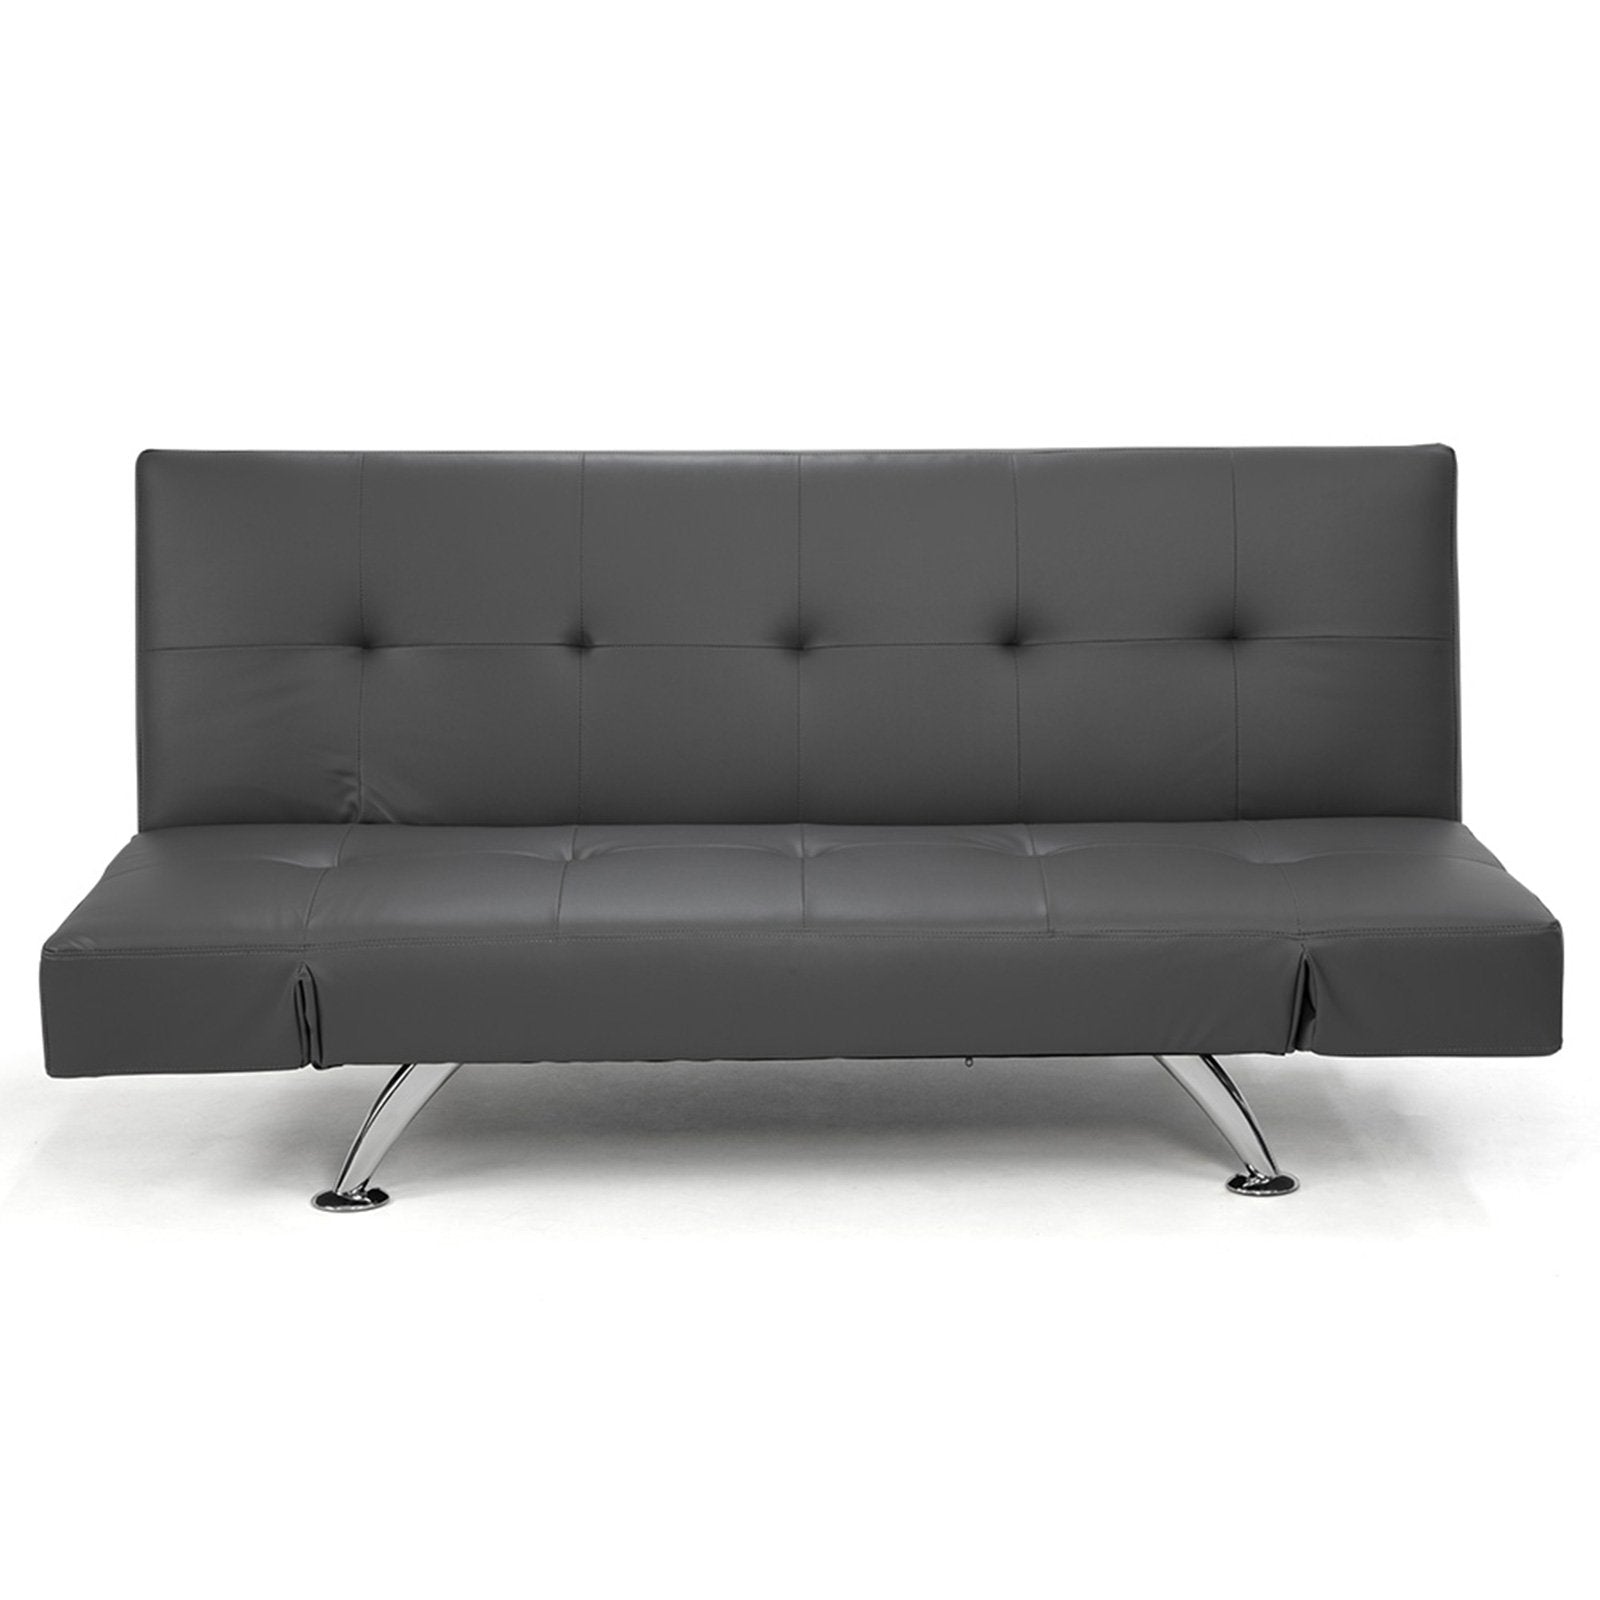 Sarantino Brooklyn Sofa Bed Lounge Faux Leather Couch Futon Furniture Adjustable Suite Gr-Furniture &gt; Sofas-PEROZ Accessories